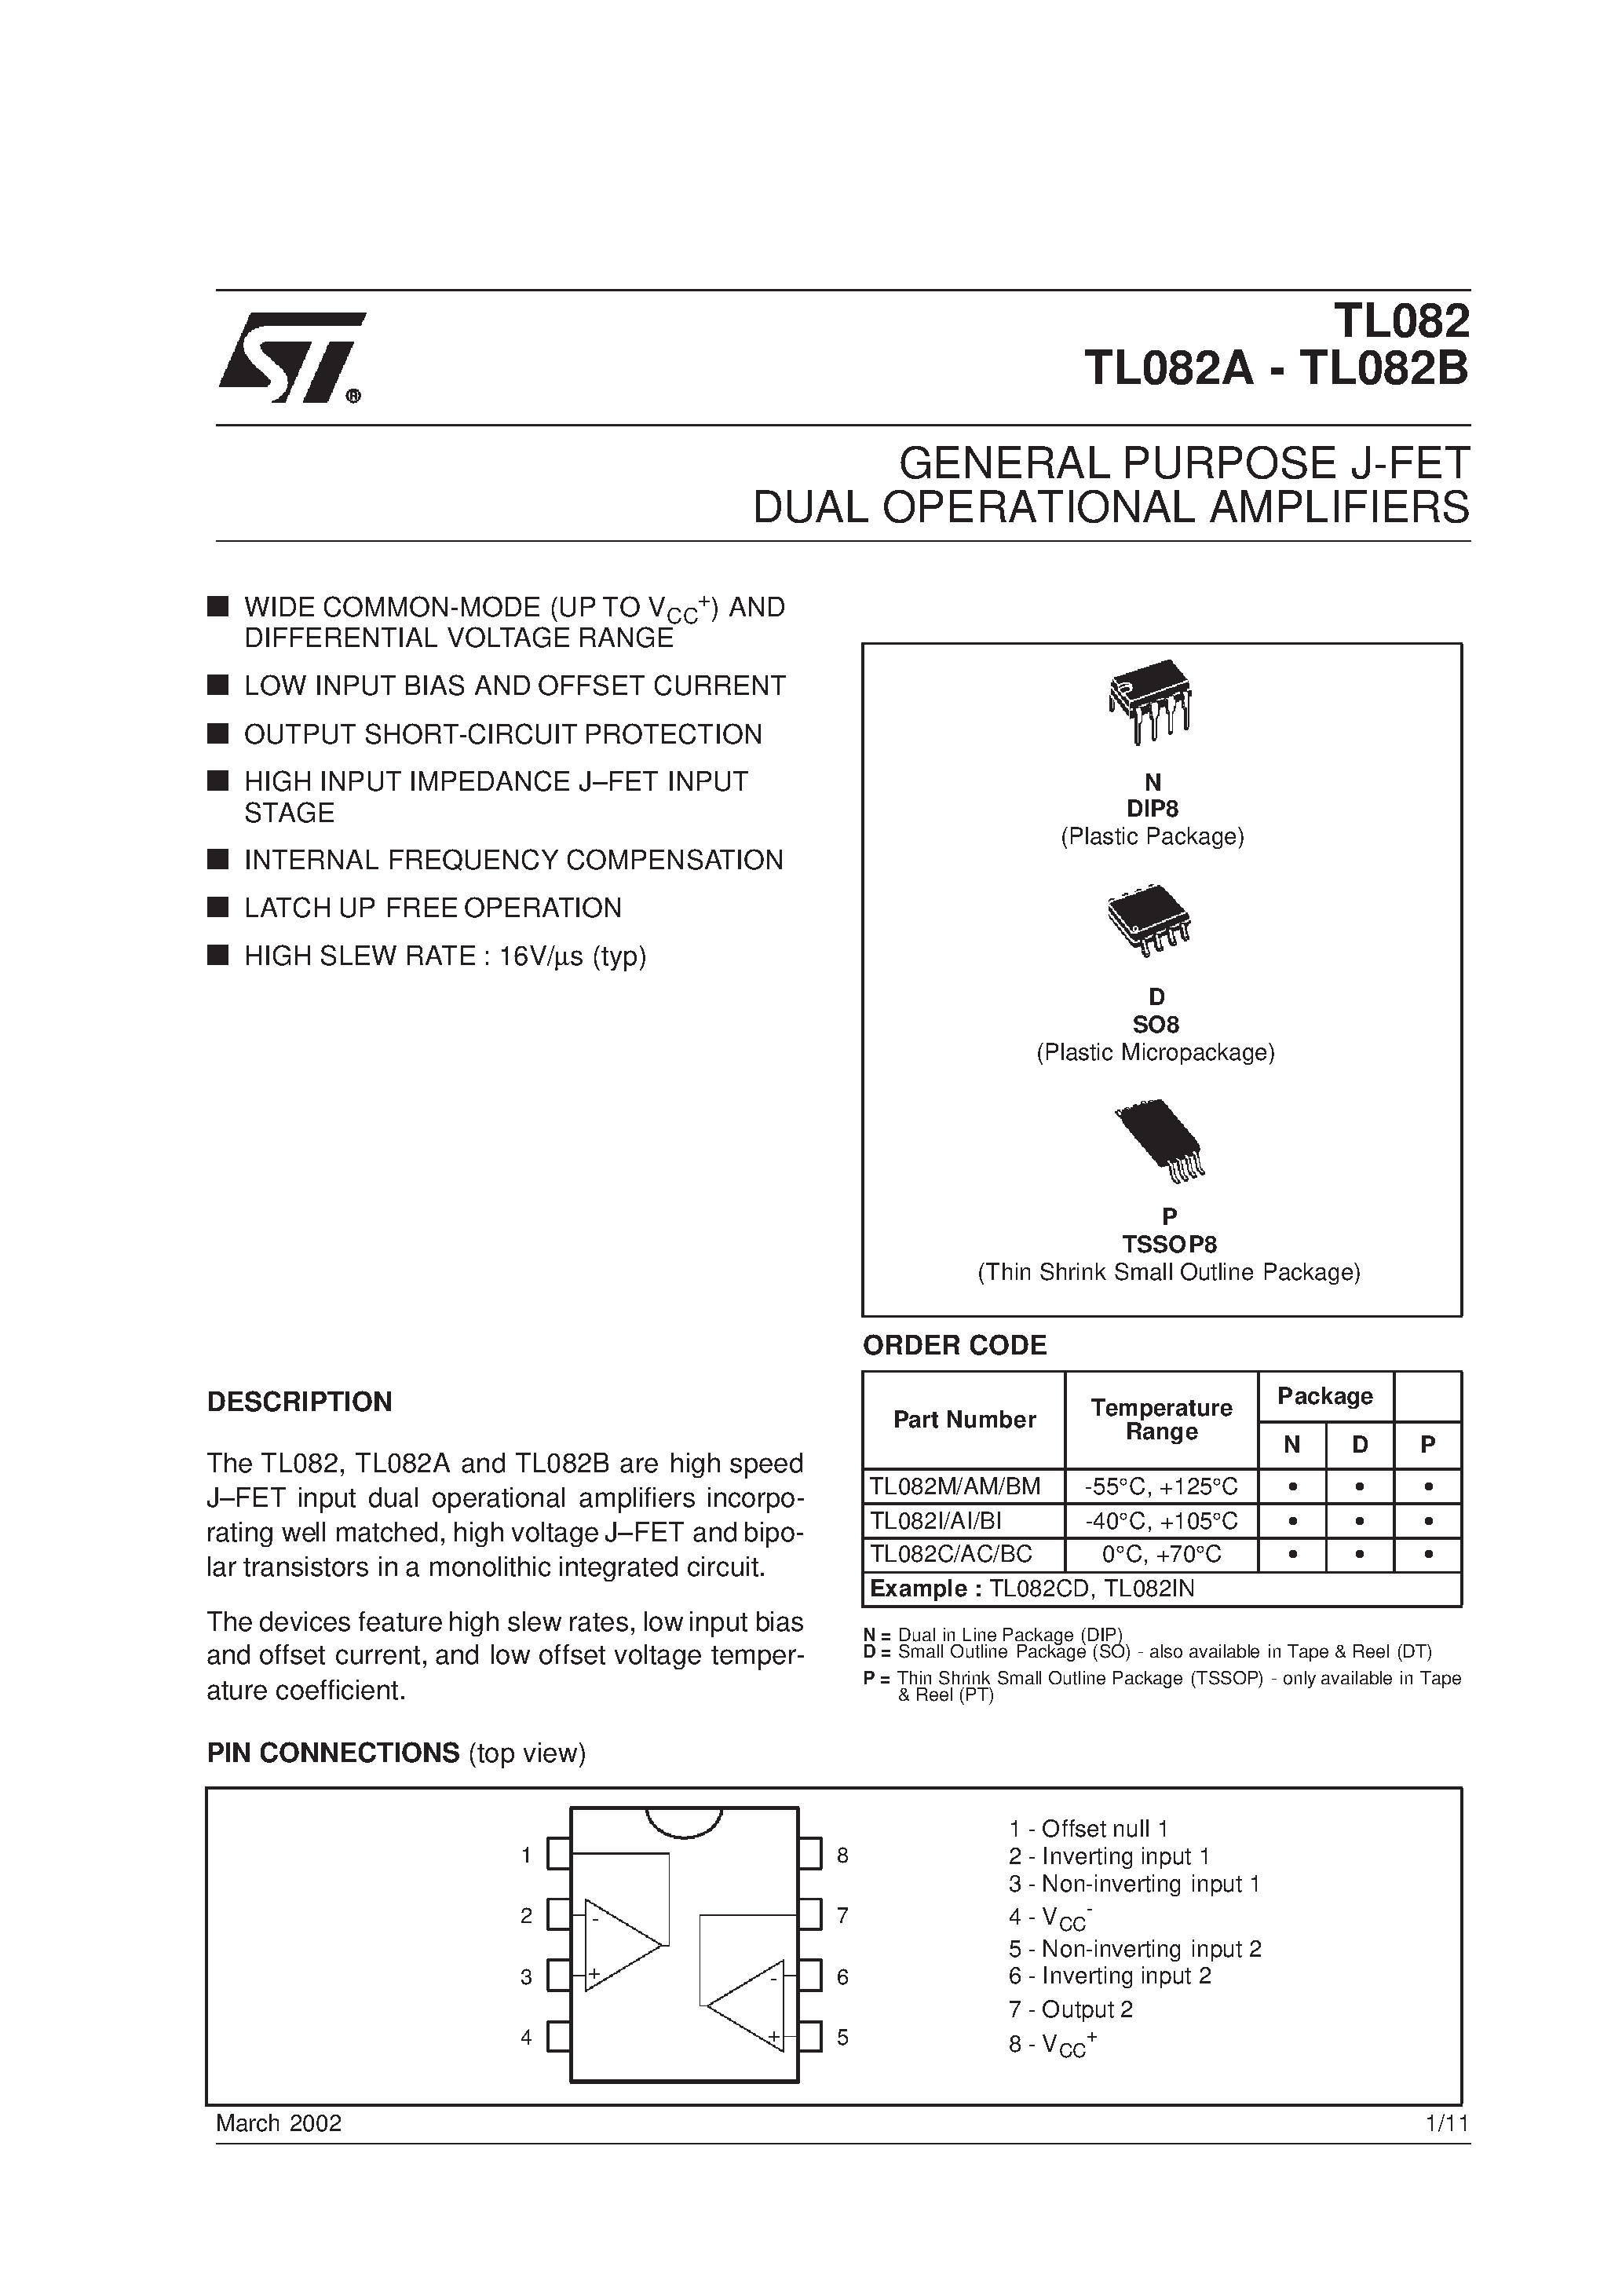 Datasheet TL082BMD - GENERAL PURPOSE J-FET DUAL OPERATIONAL AMPLIFIERS page 1